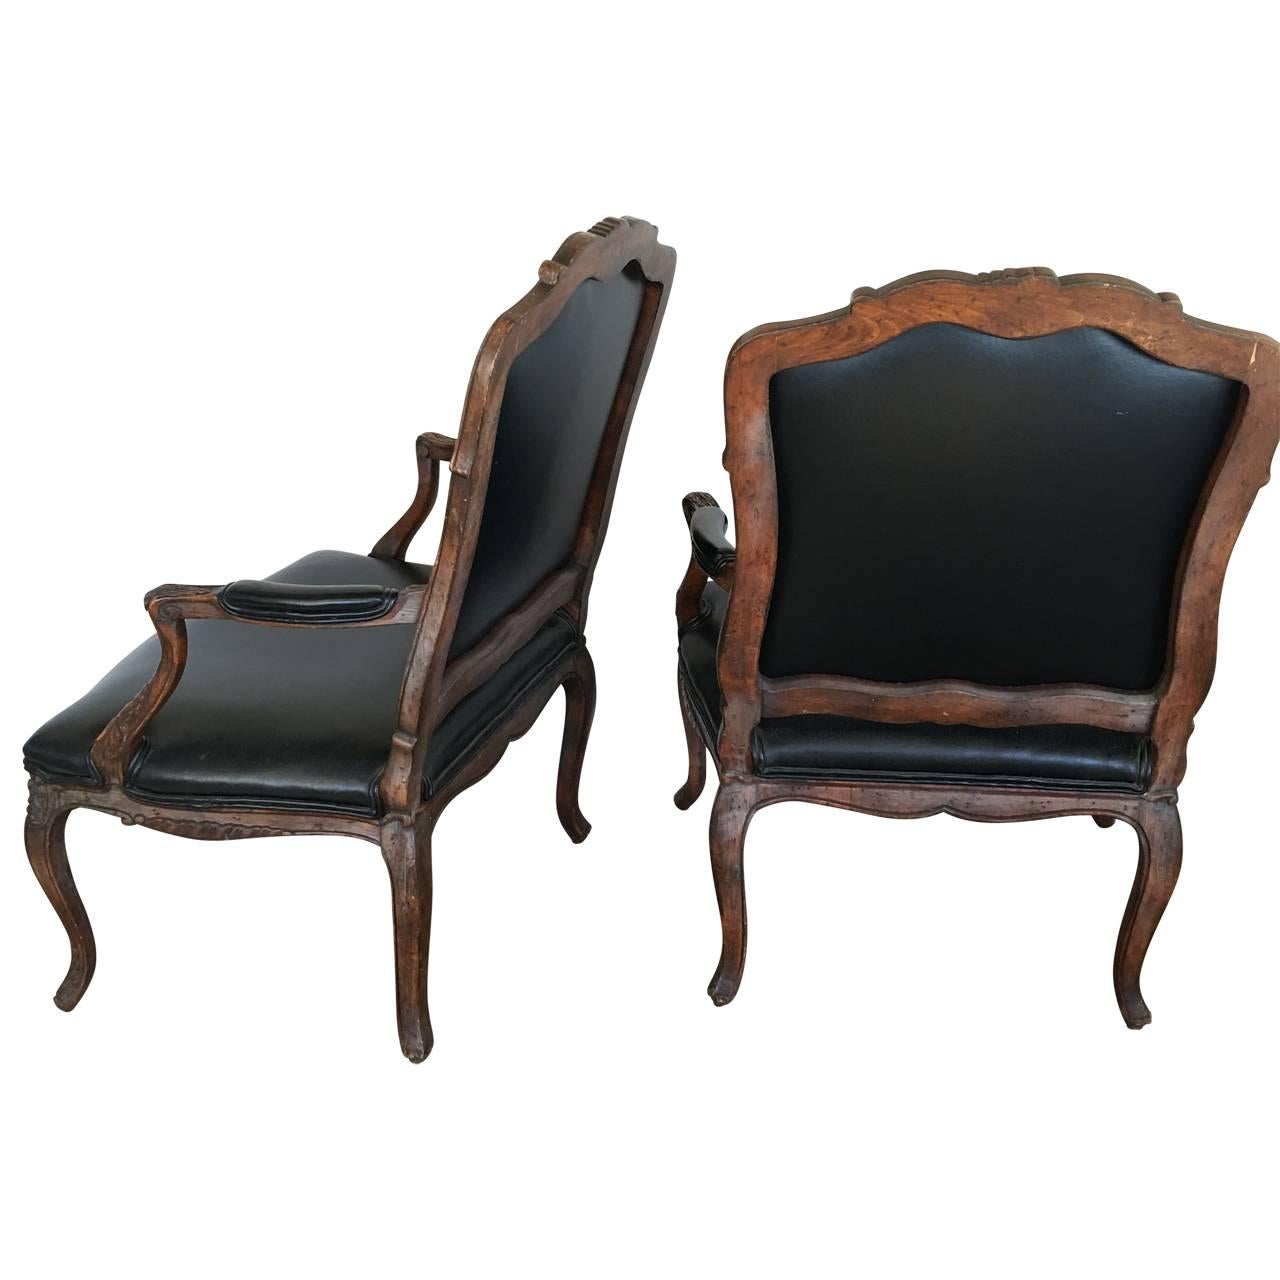 Newly upholstered pair of French Rococo armchairs.